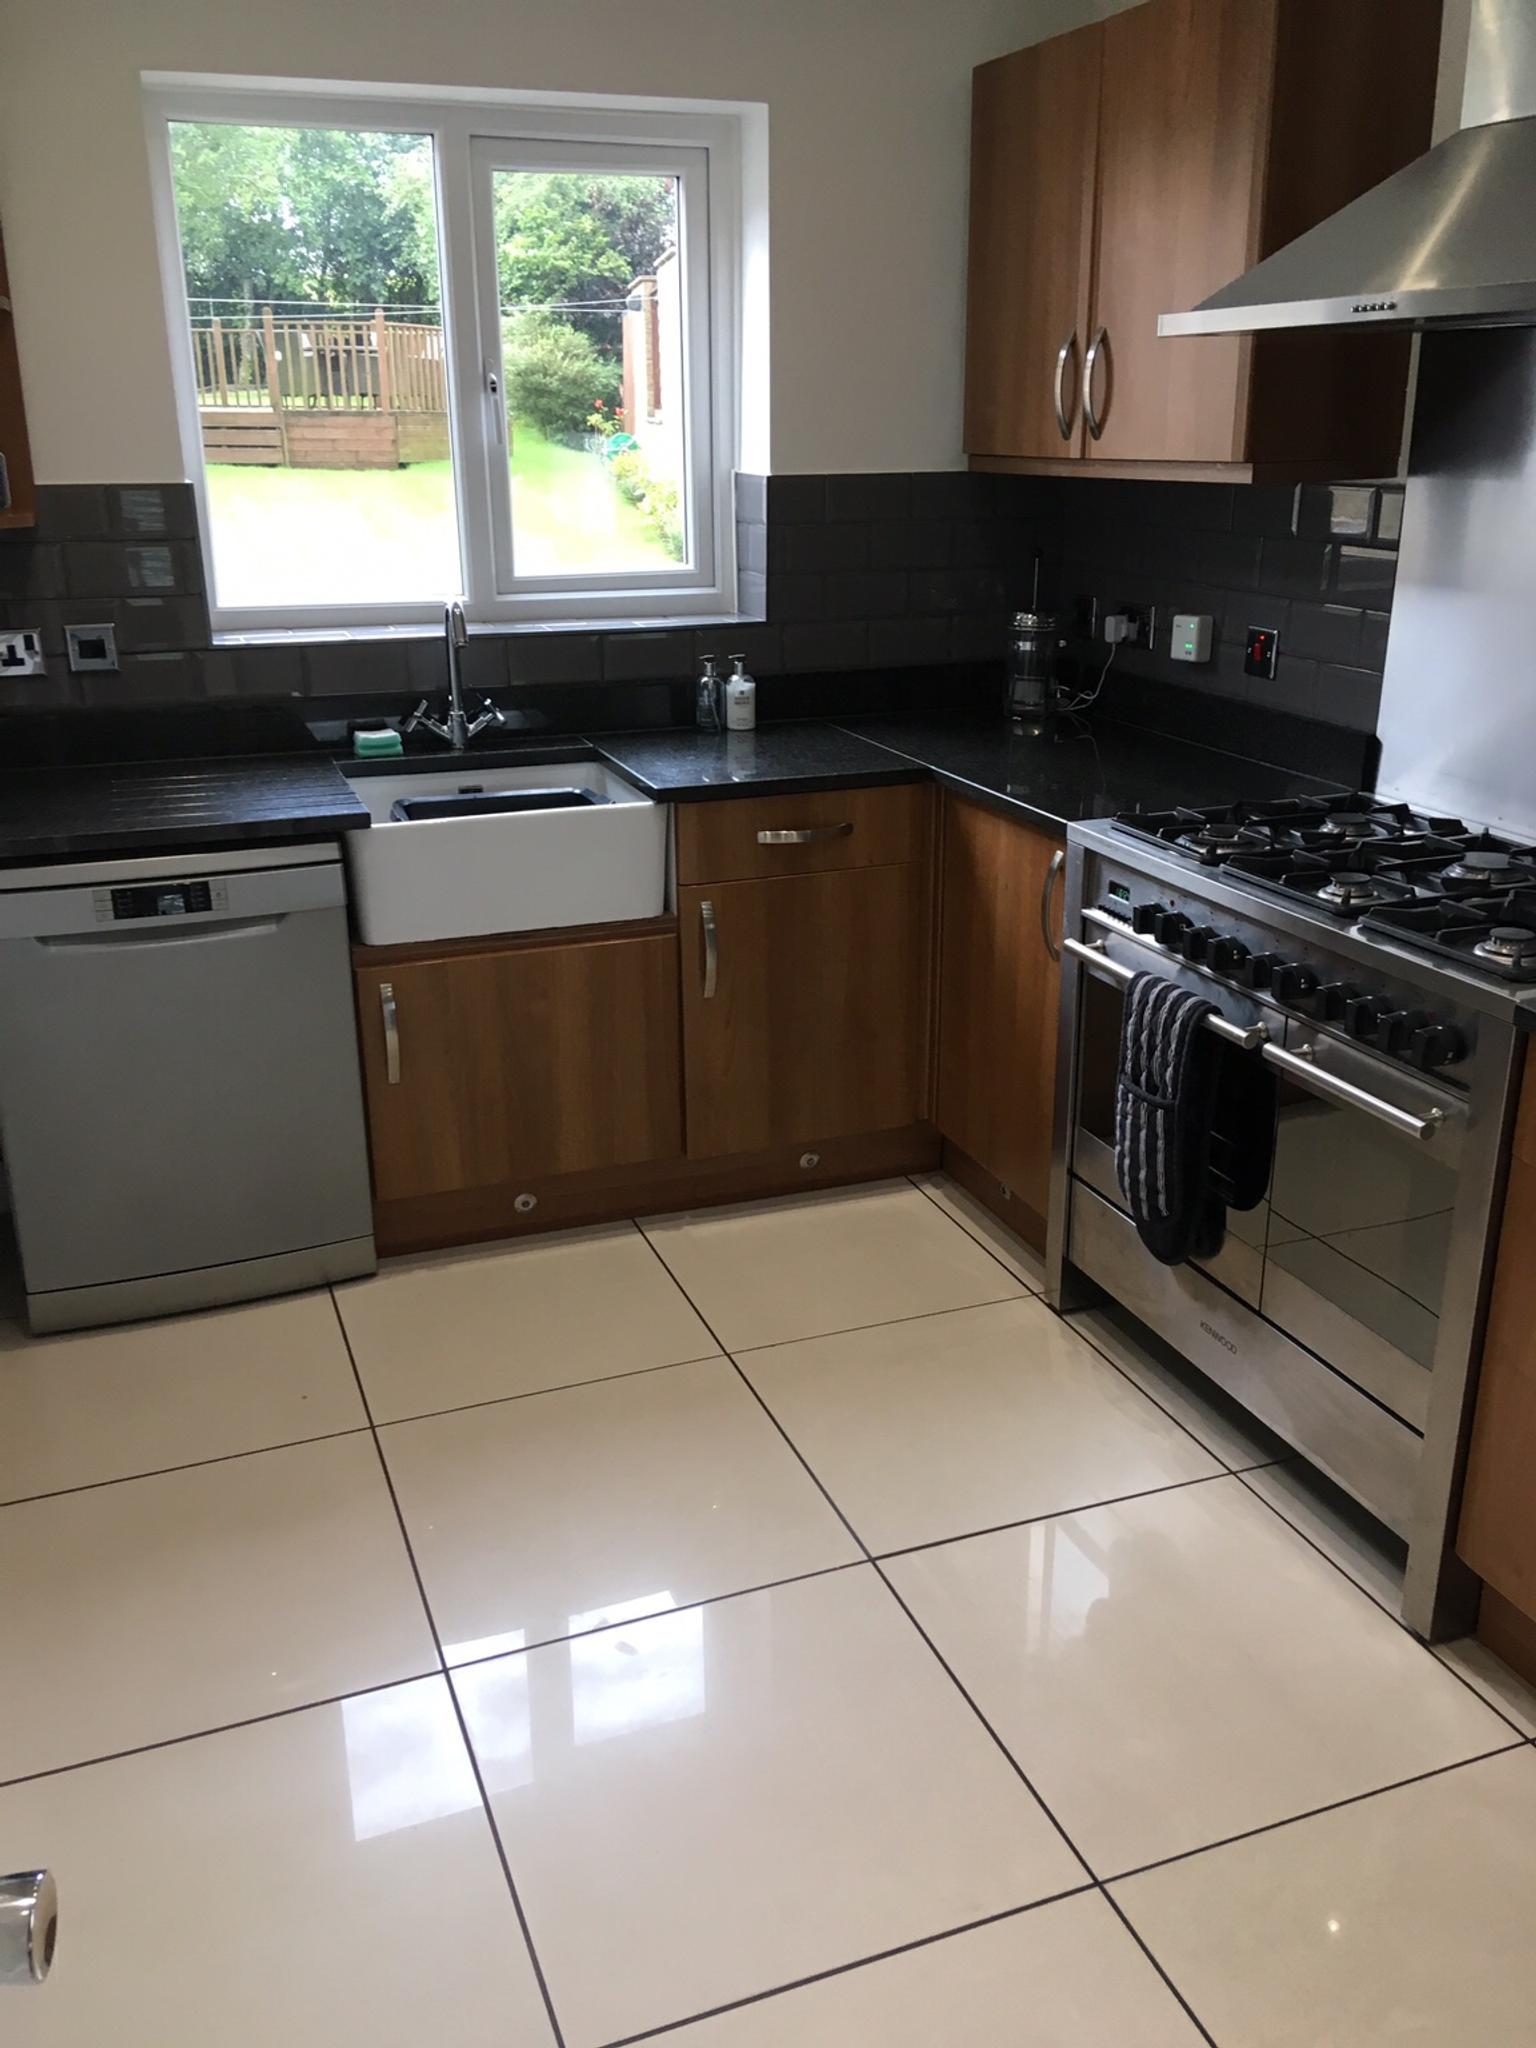 Kitchen Reduced For Quick Sale In Bradford For 150 00 For